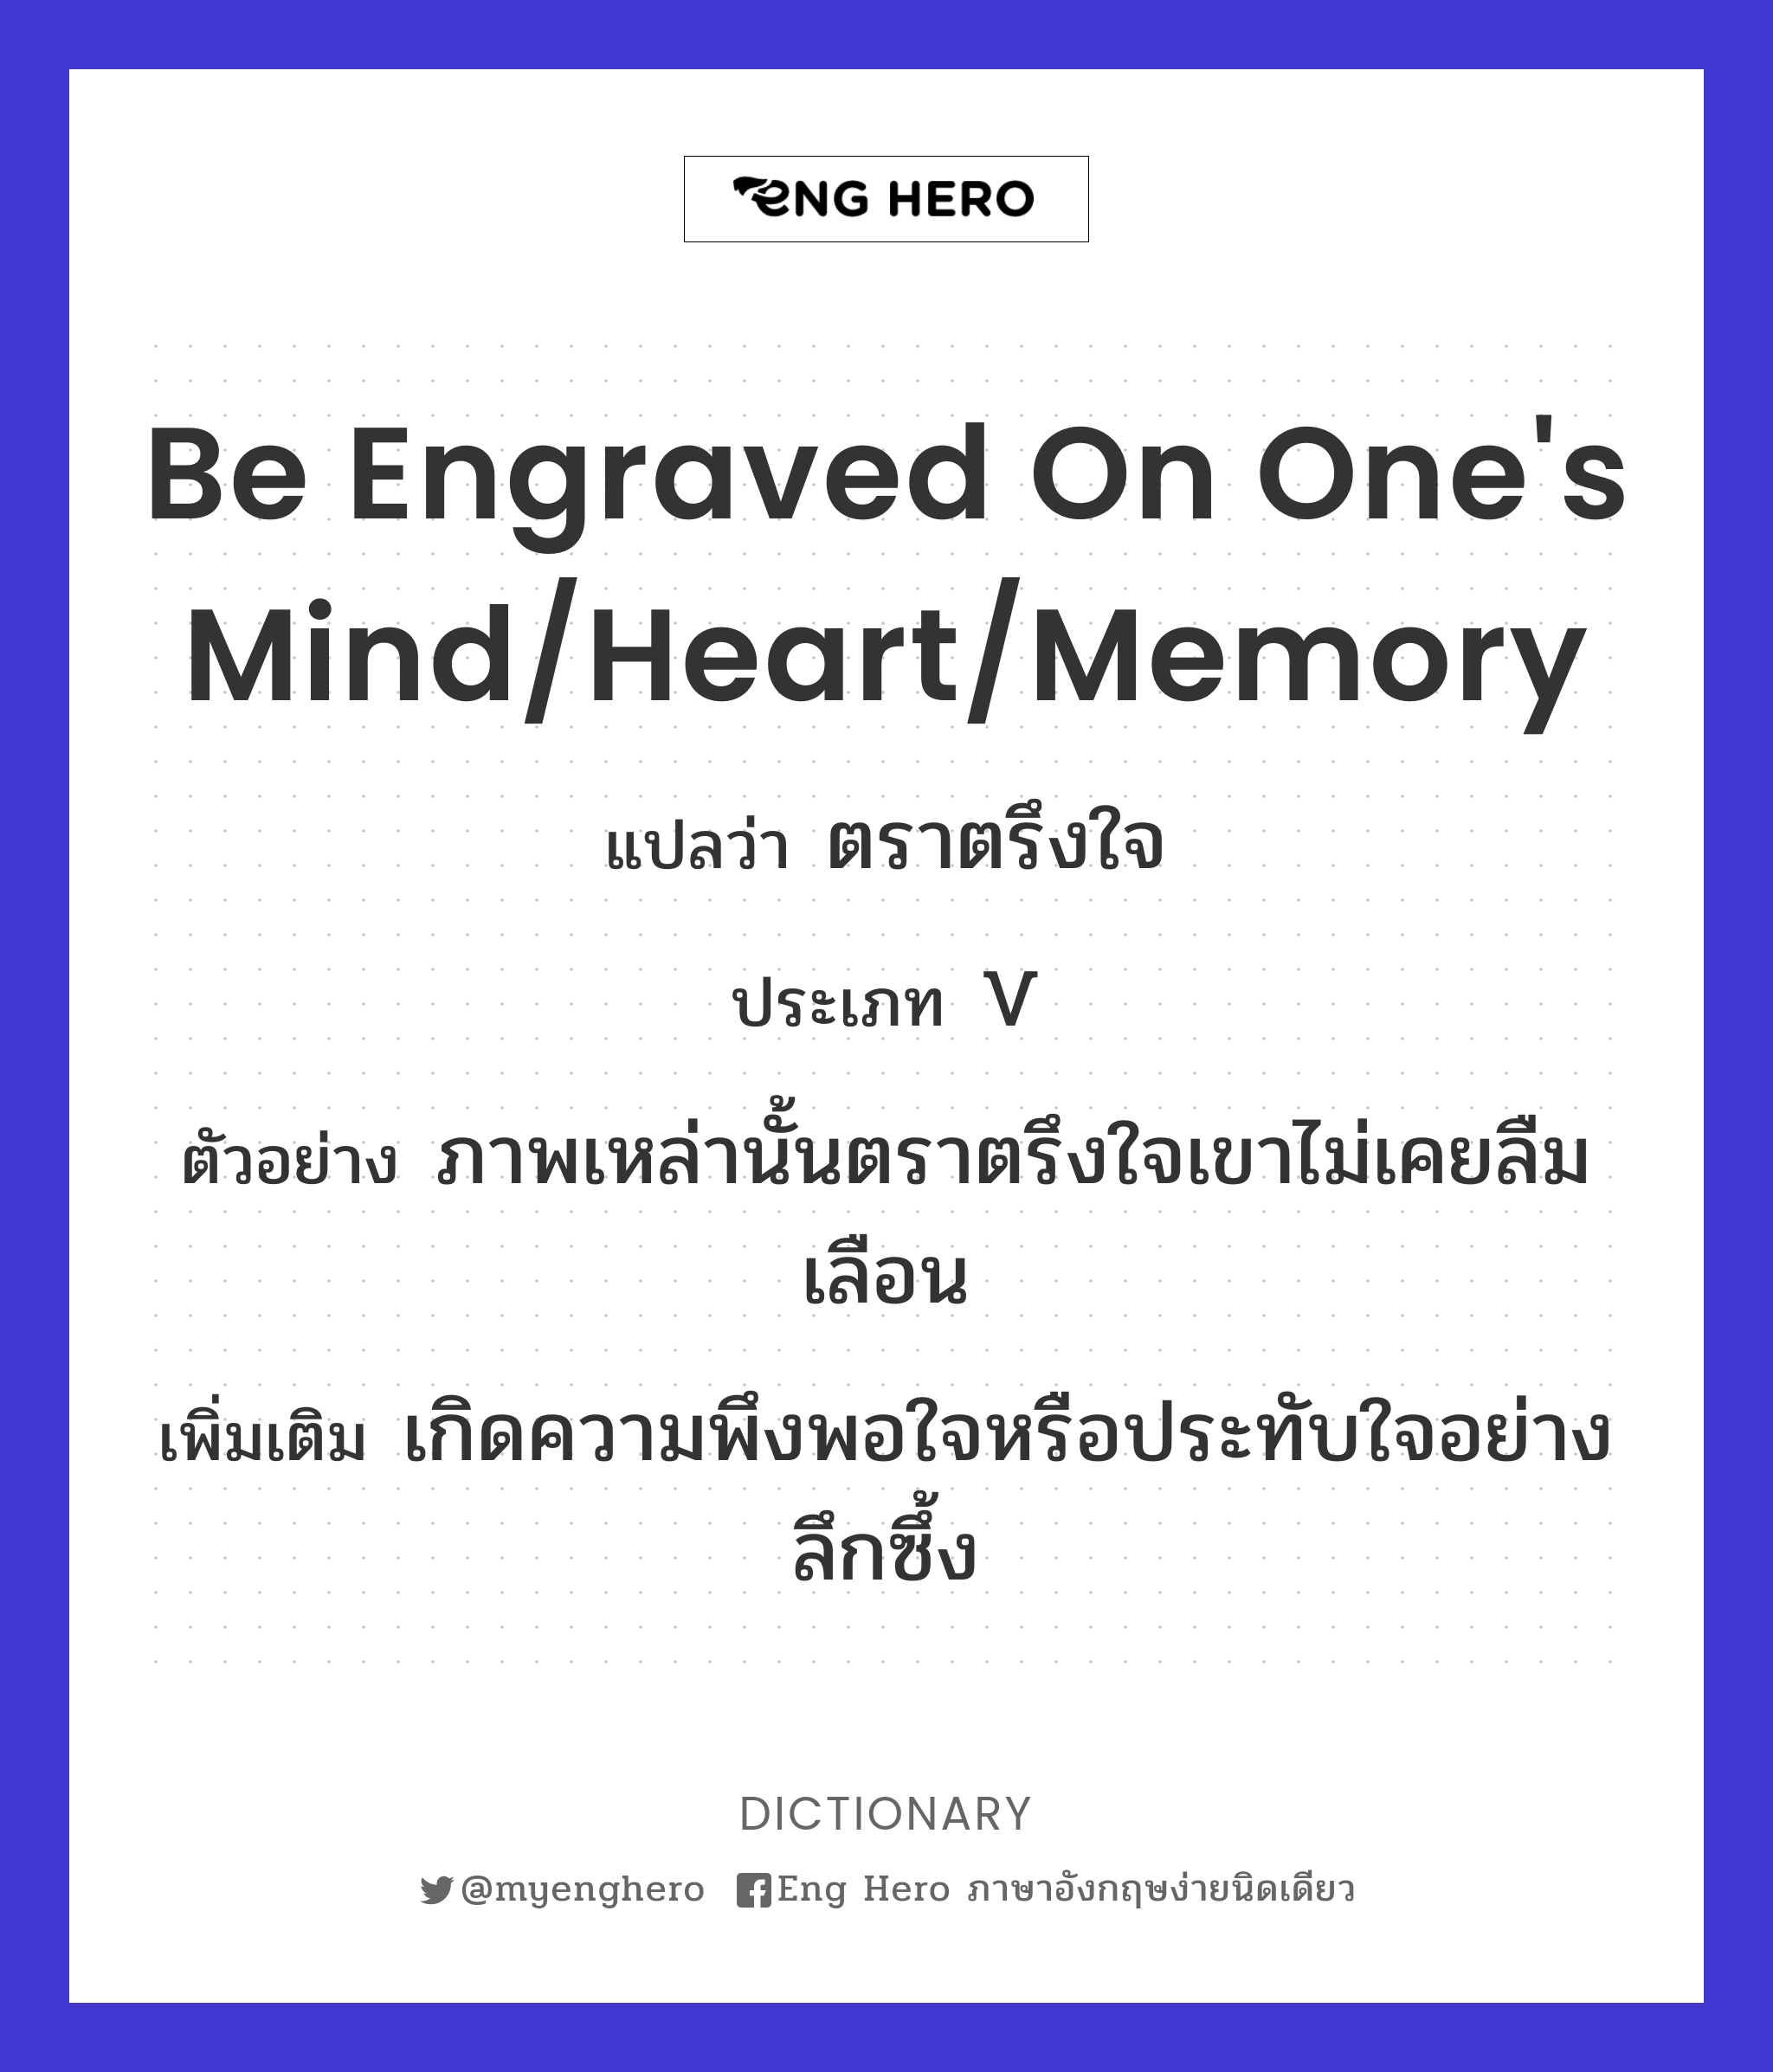 be engraved on one's mind/heart/memory